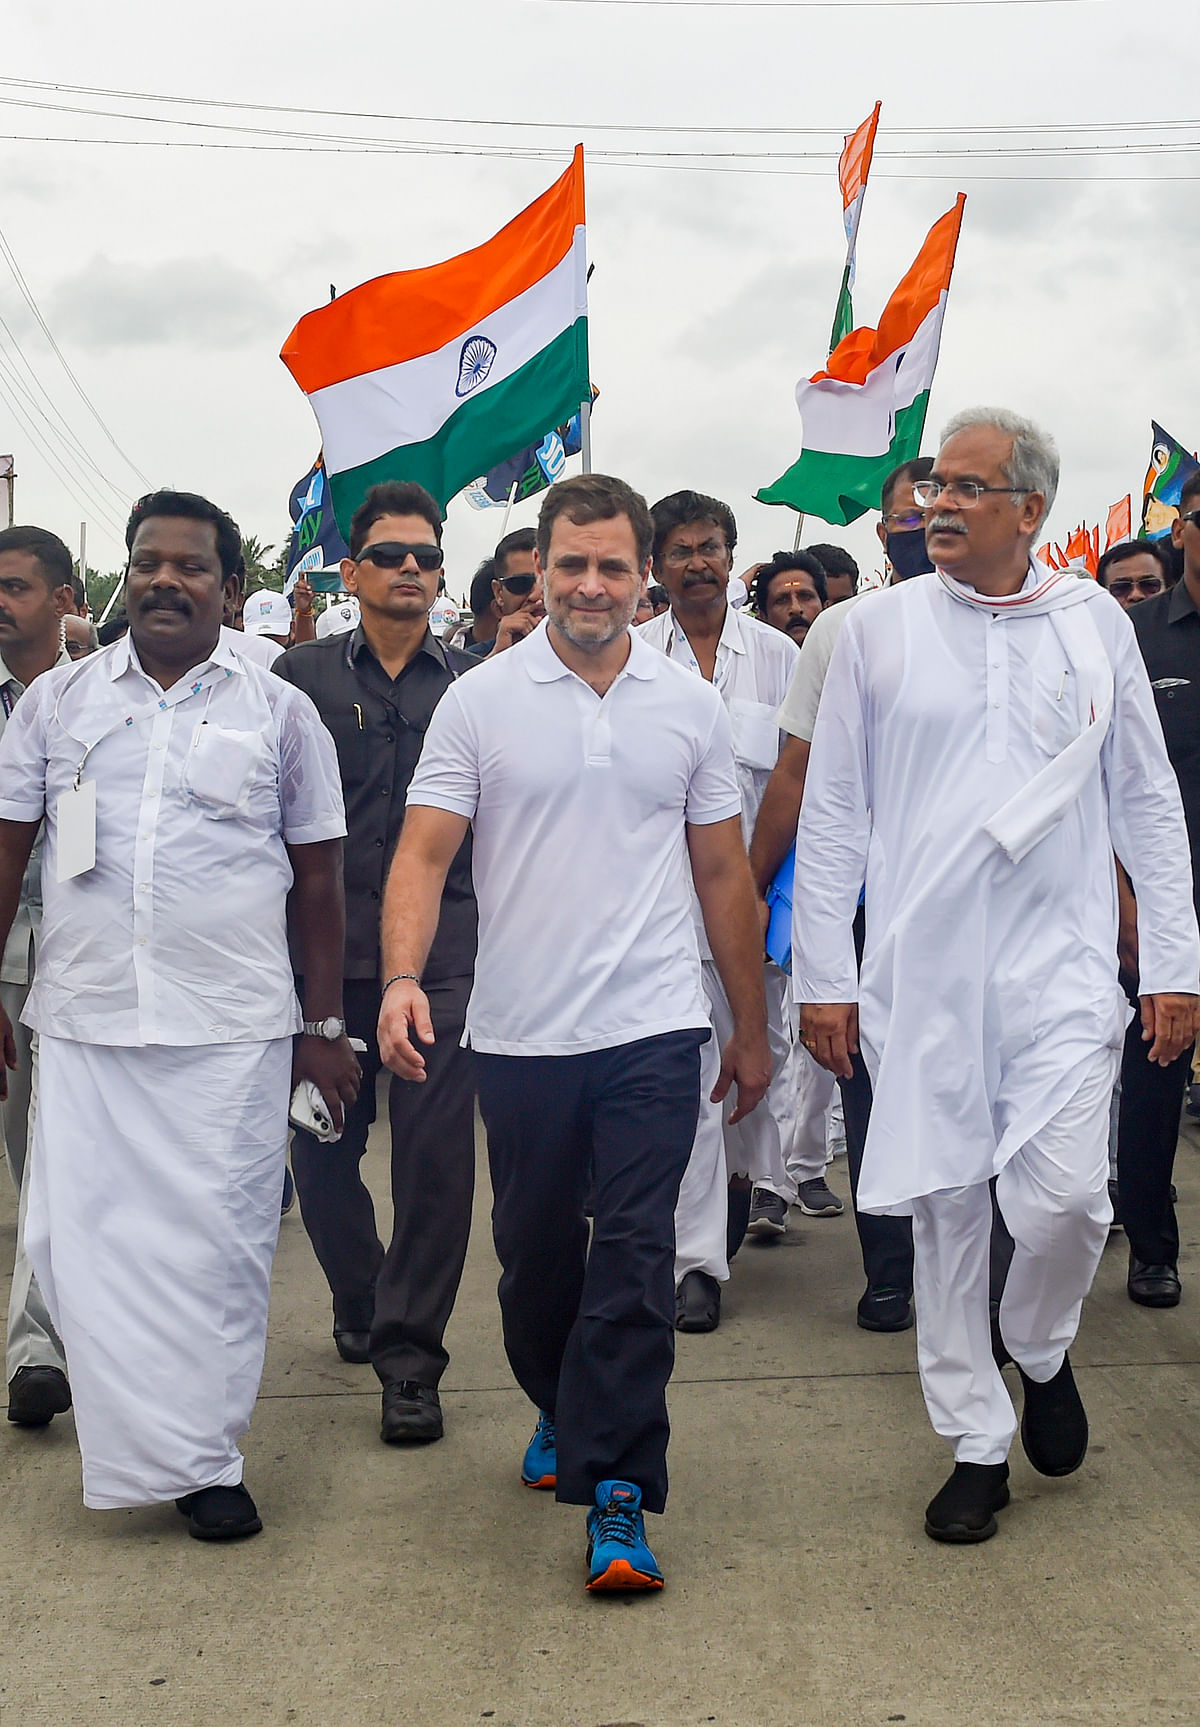 After reaching Kerala on 11 September, the Yatra will traverse through the state for the next 18 days.